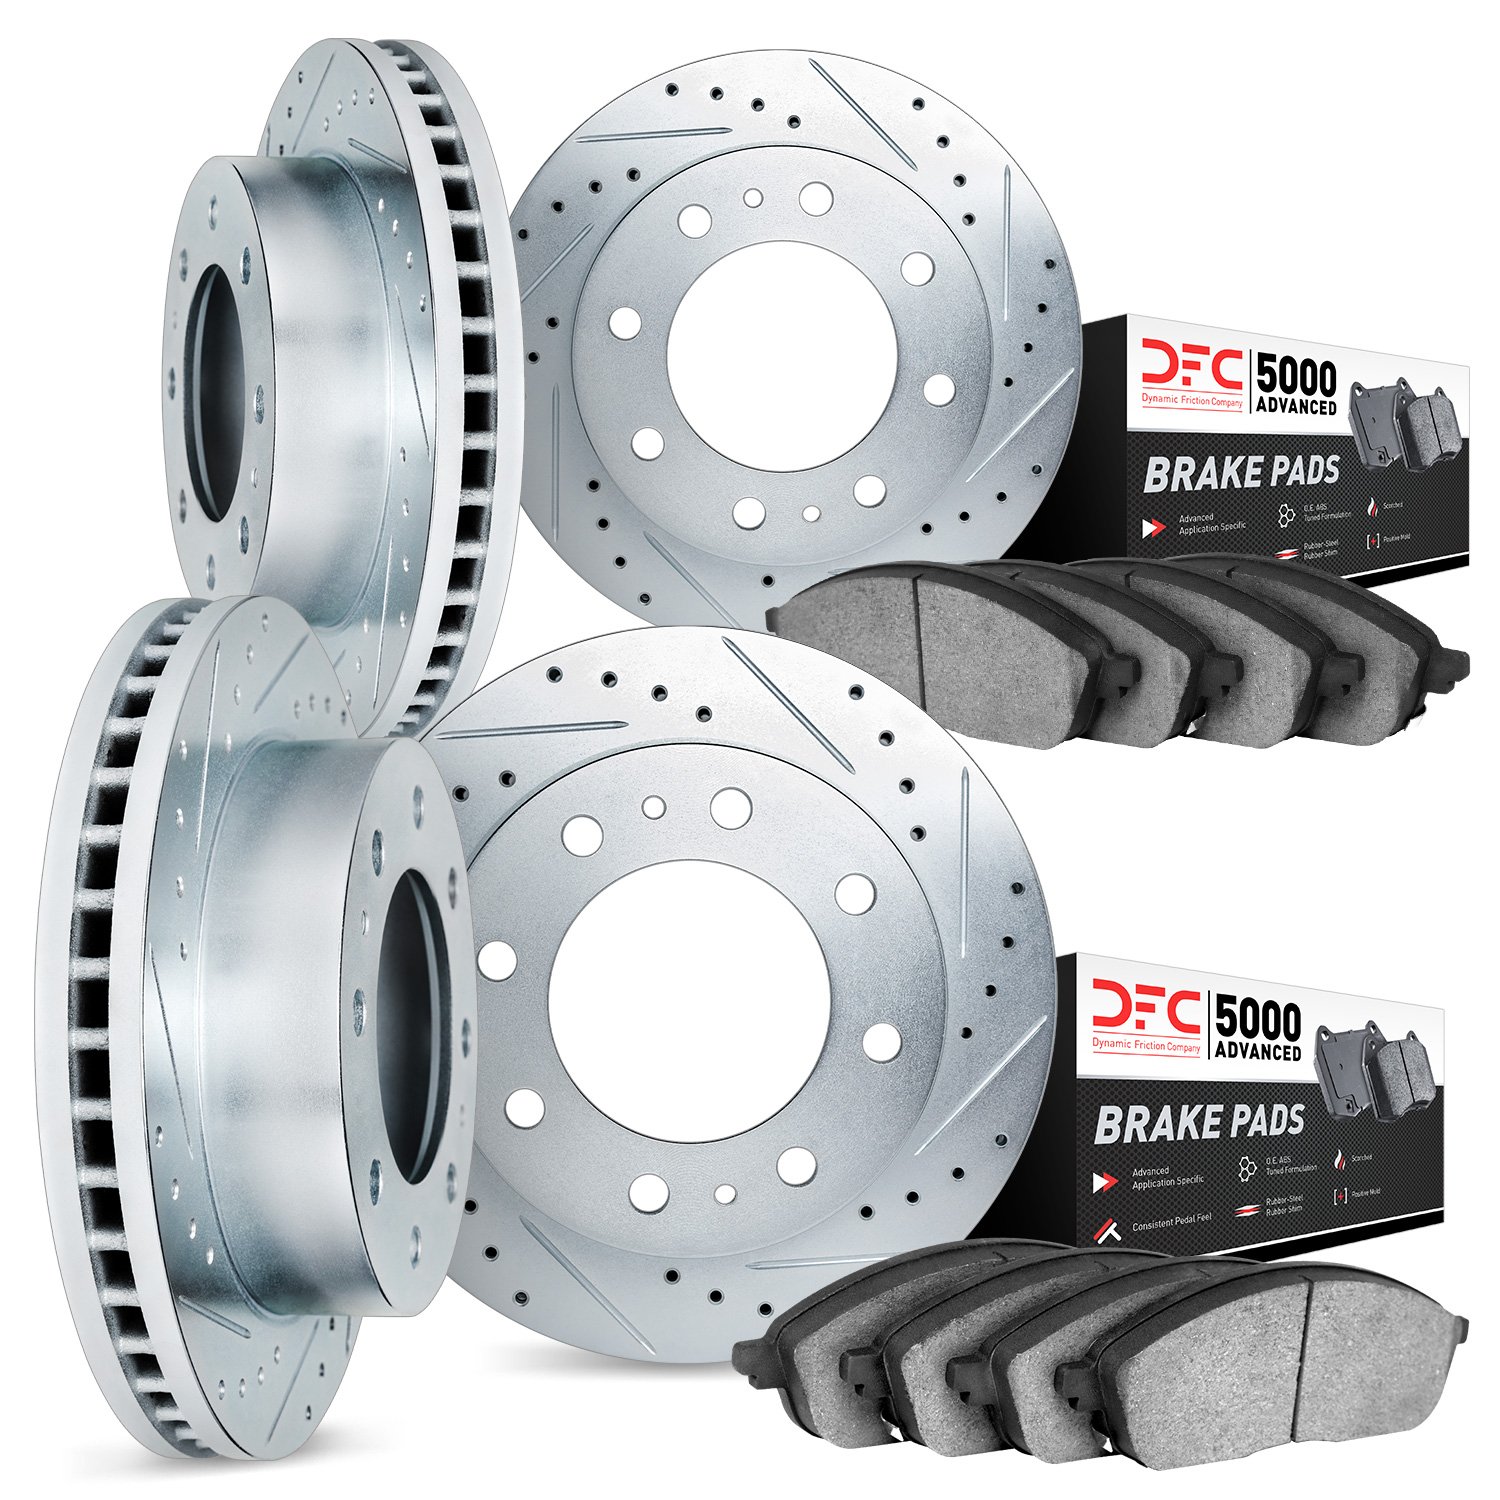 7504-48021 Drilled/Slotted Brake Rotors w/5000 Advanced Brake Pads Kit [Silver], 2001-2003 GM, Position: Front and Rear